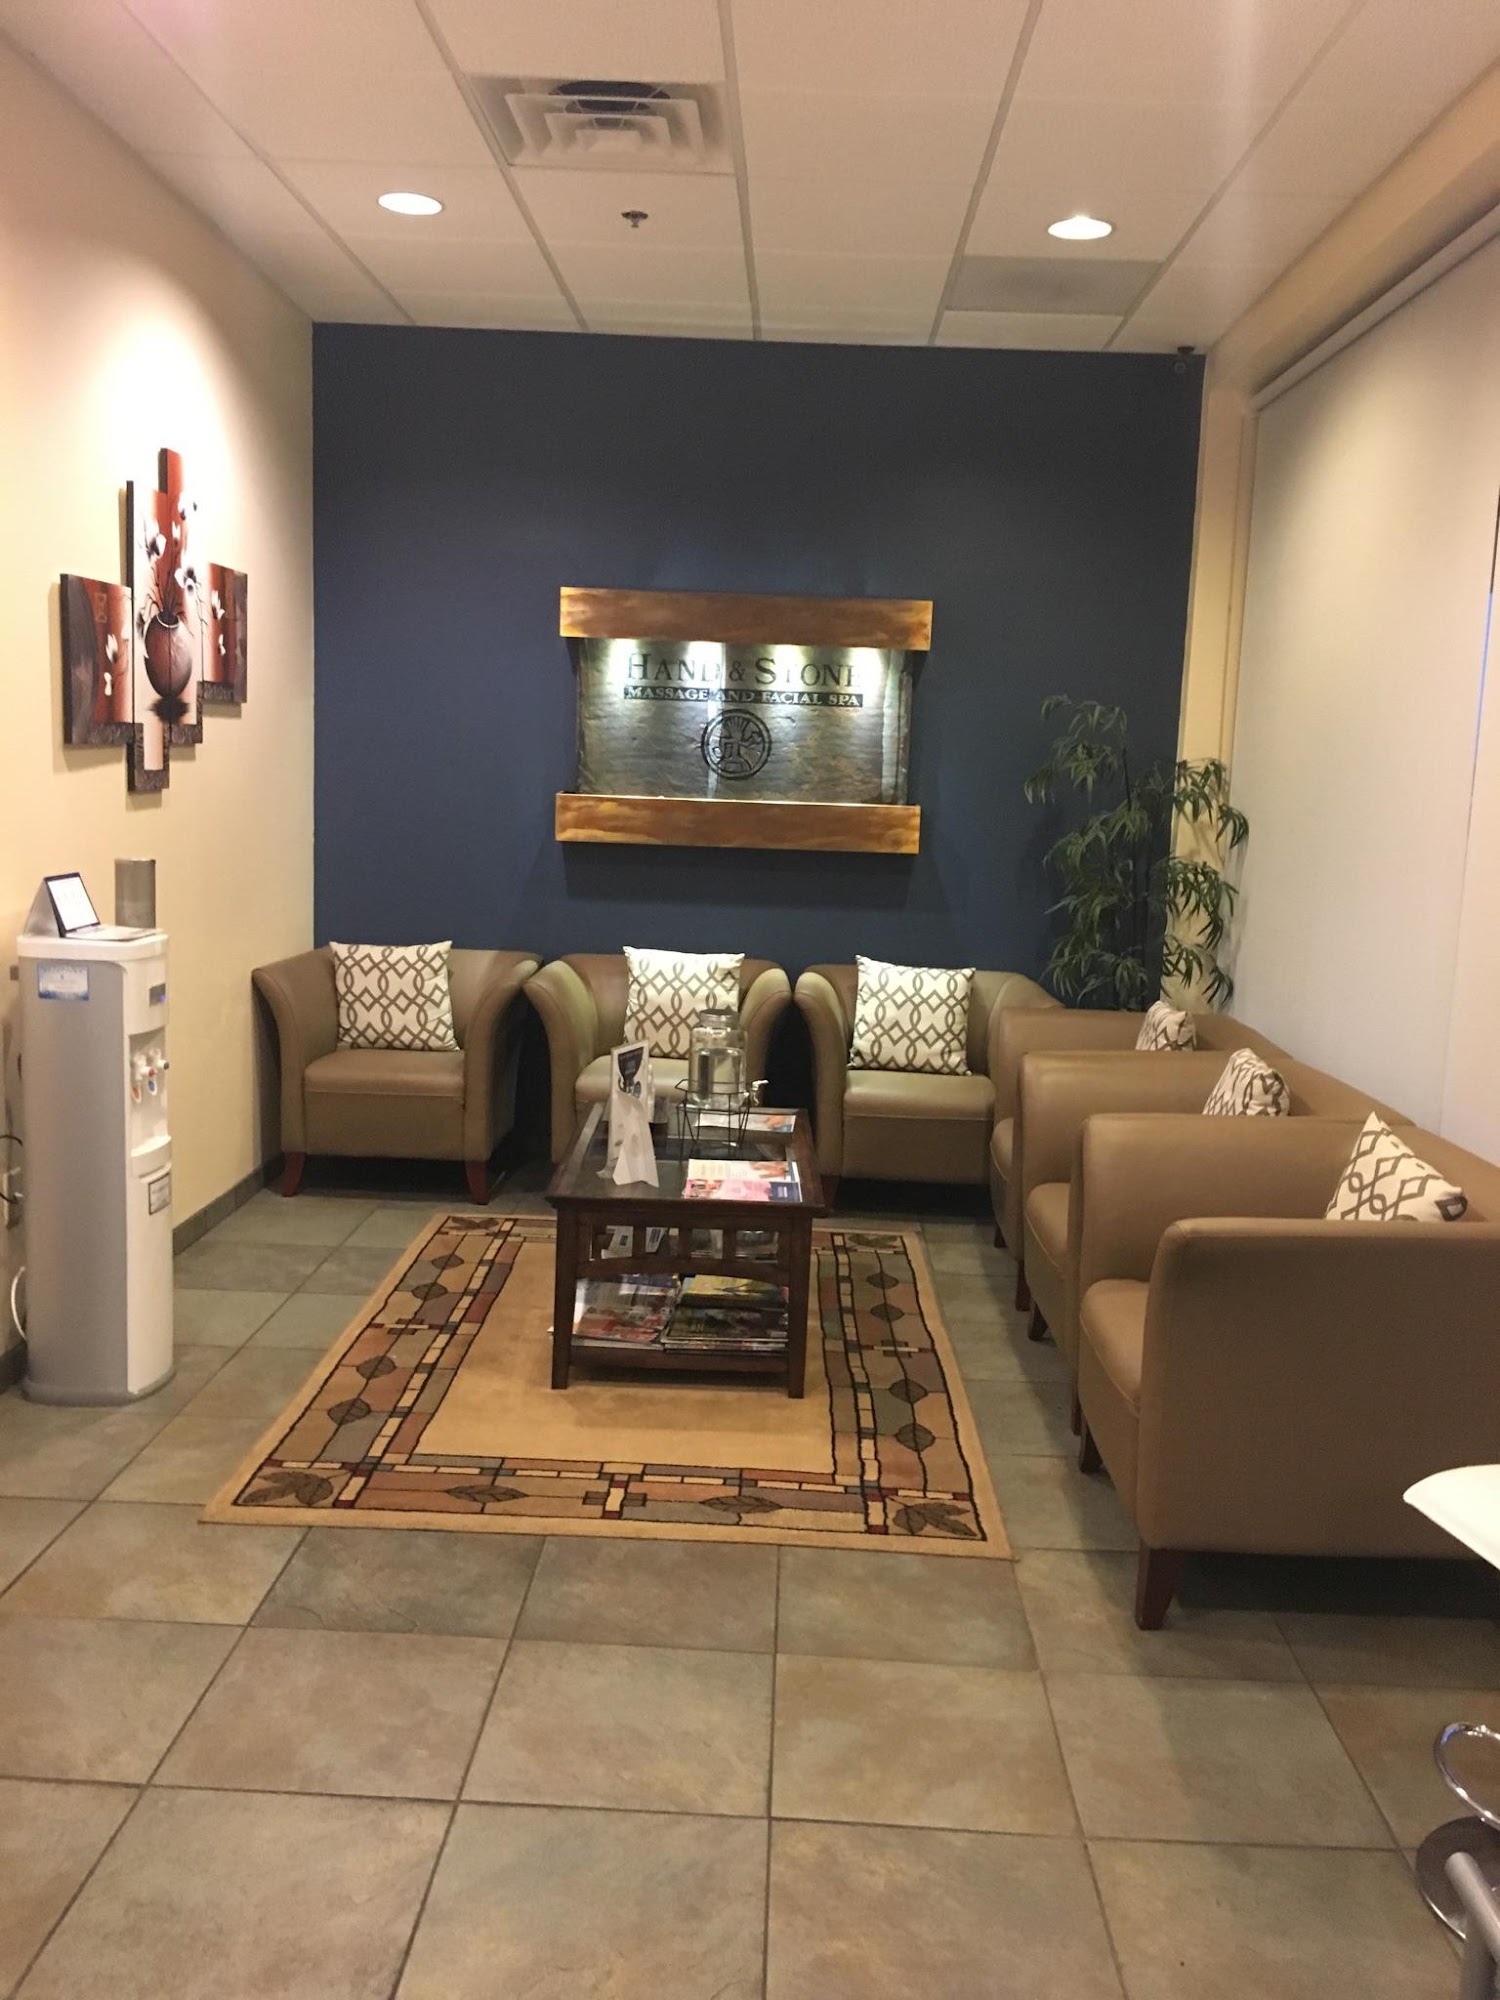 Hand and Stone Massage and Facial Spa 416 US-202, Bedminster New Jersey 07921